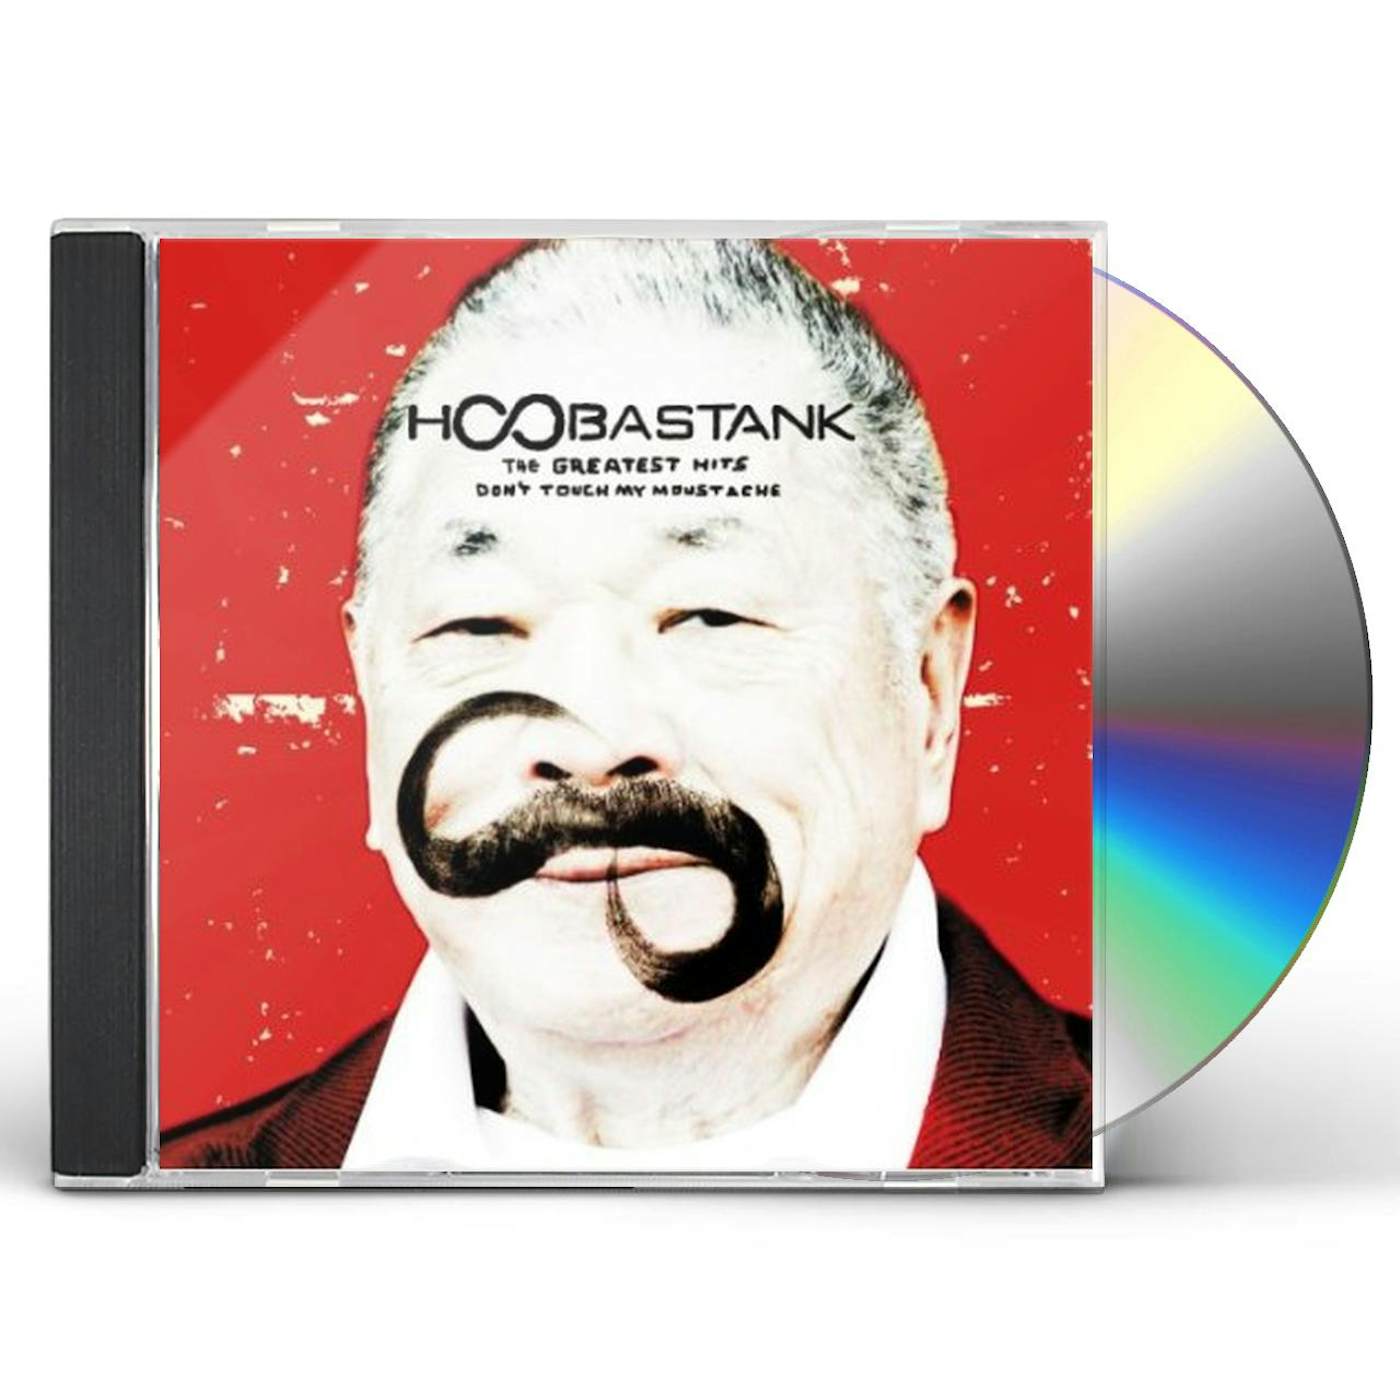 Hoobastank GREATEST HITS: DON'T TOUCH MY MOUSTACHE CD